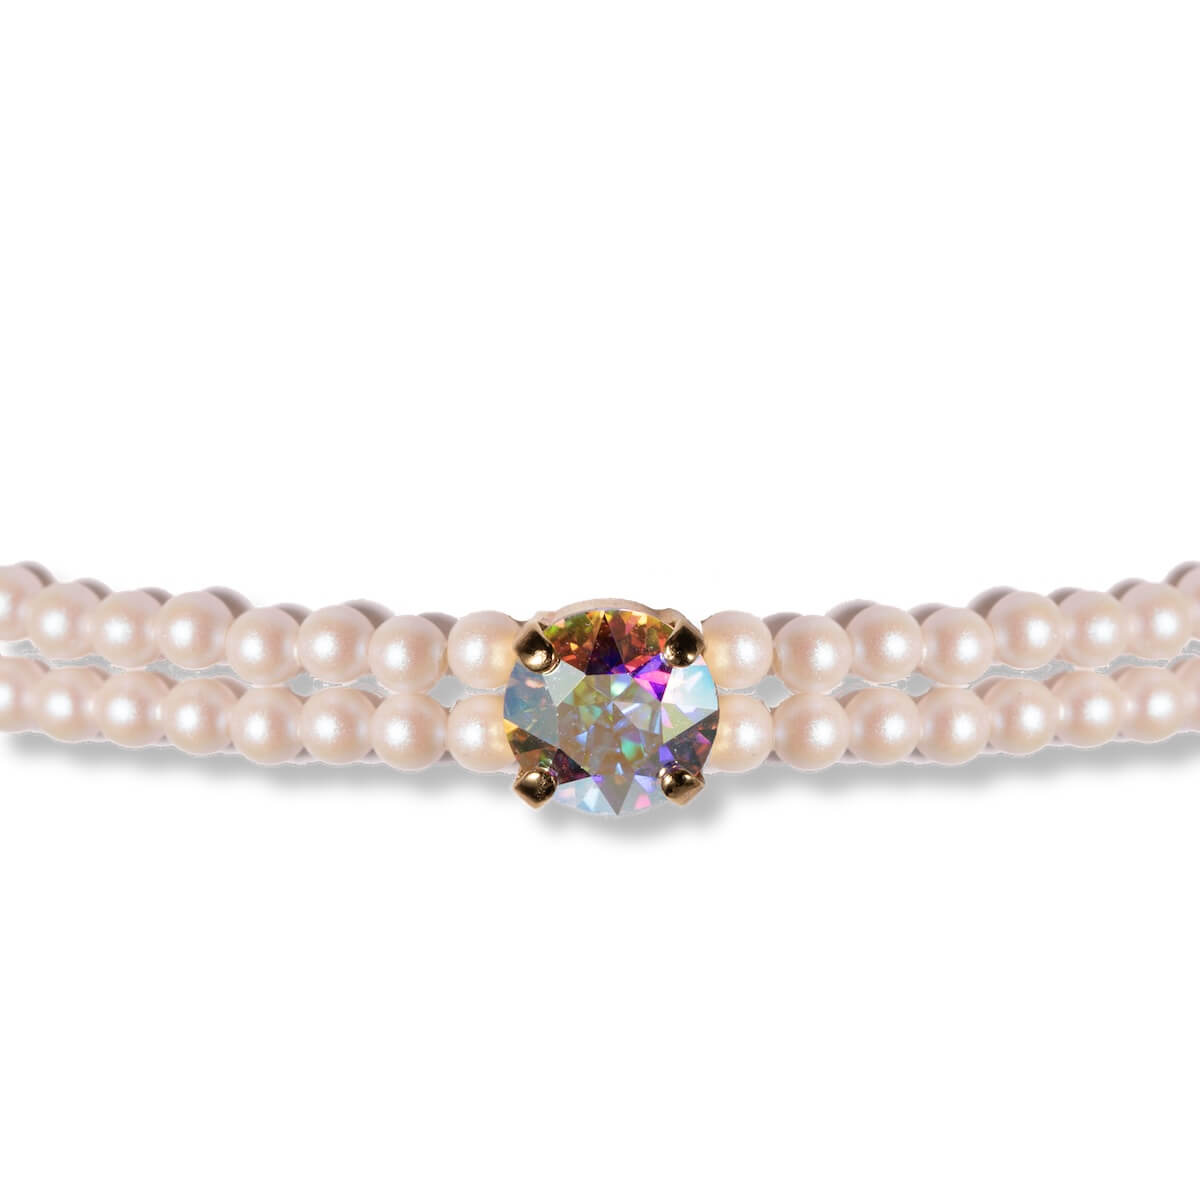 Anklet with crystals and pearls